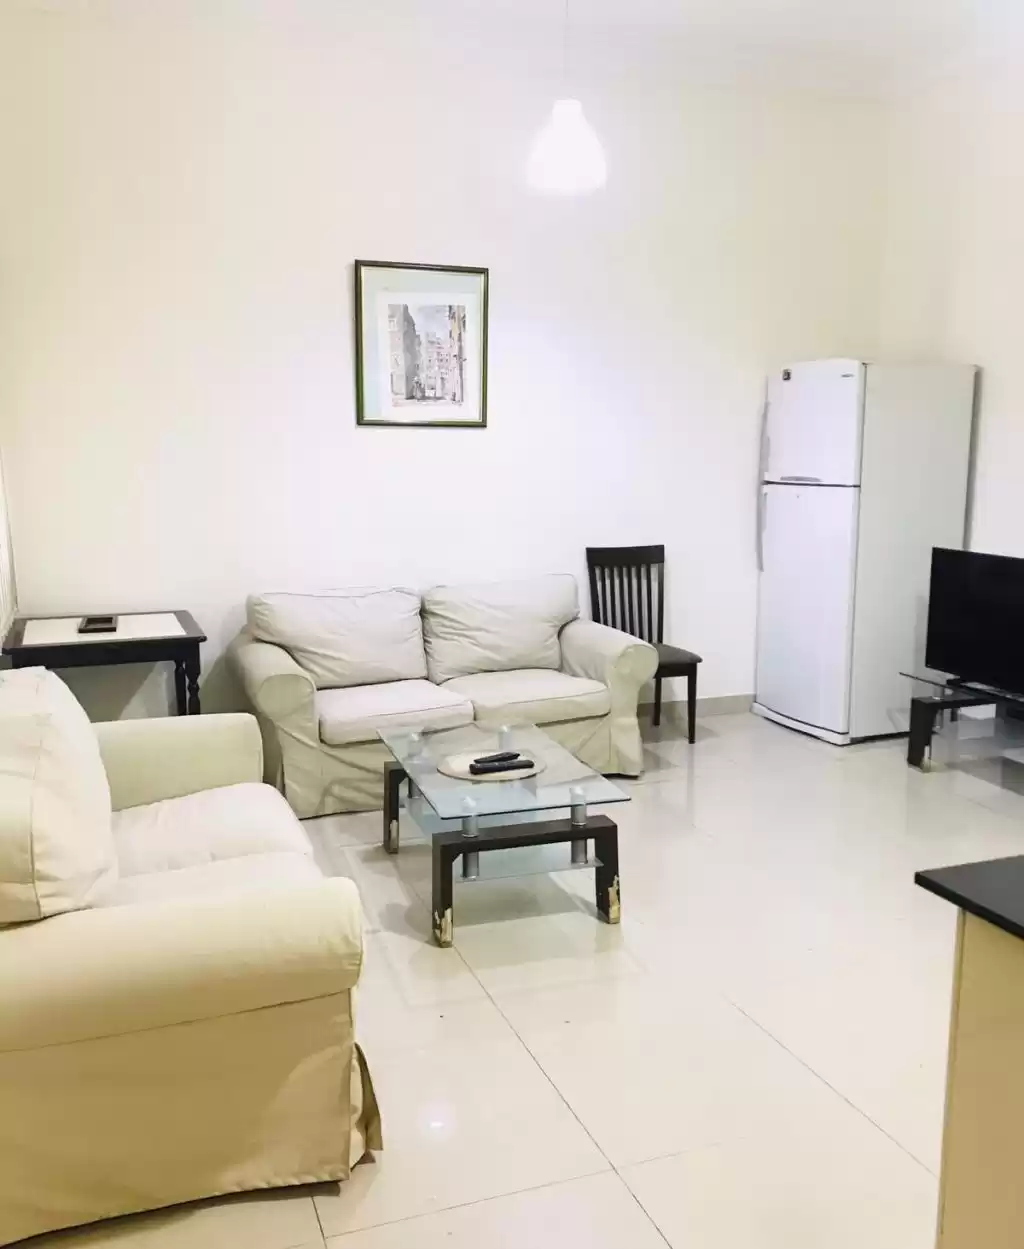 Residential Ready Property 1 Bedroom F/F Apartment  for rent in Al Sadd , Doha #12692 - 1  image 